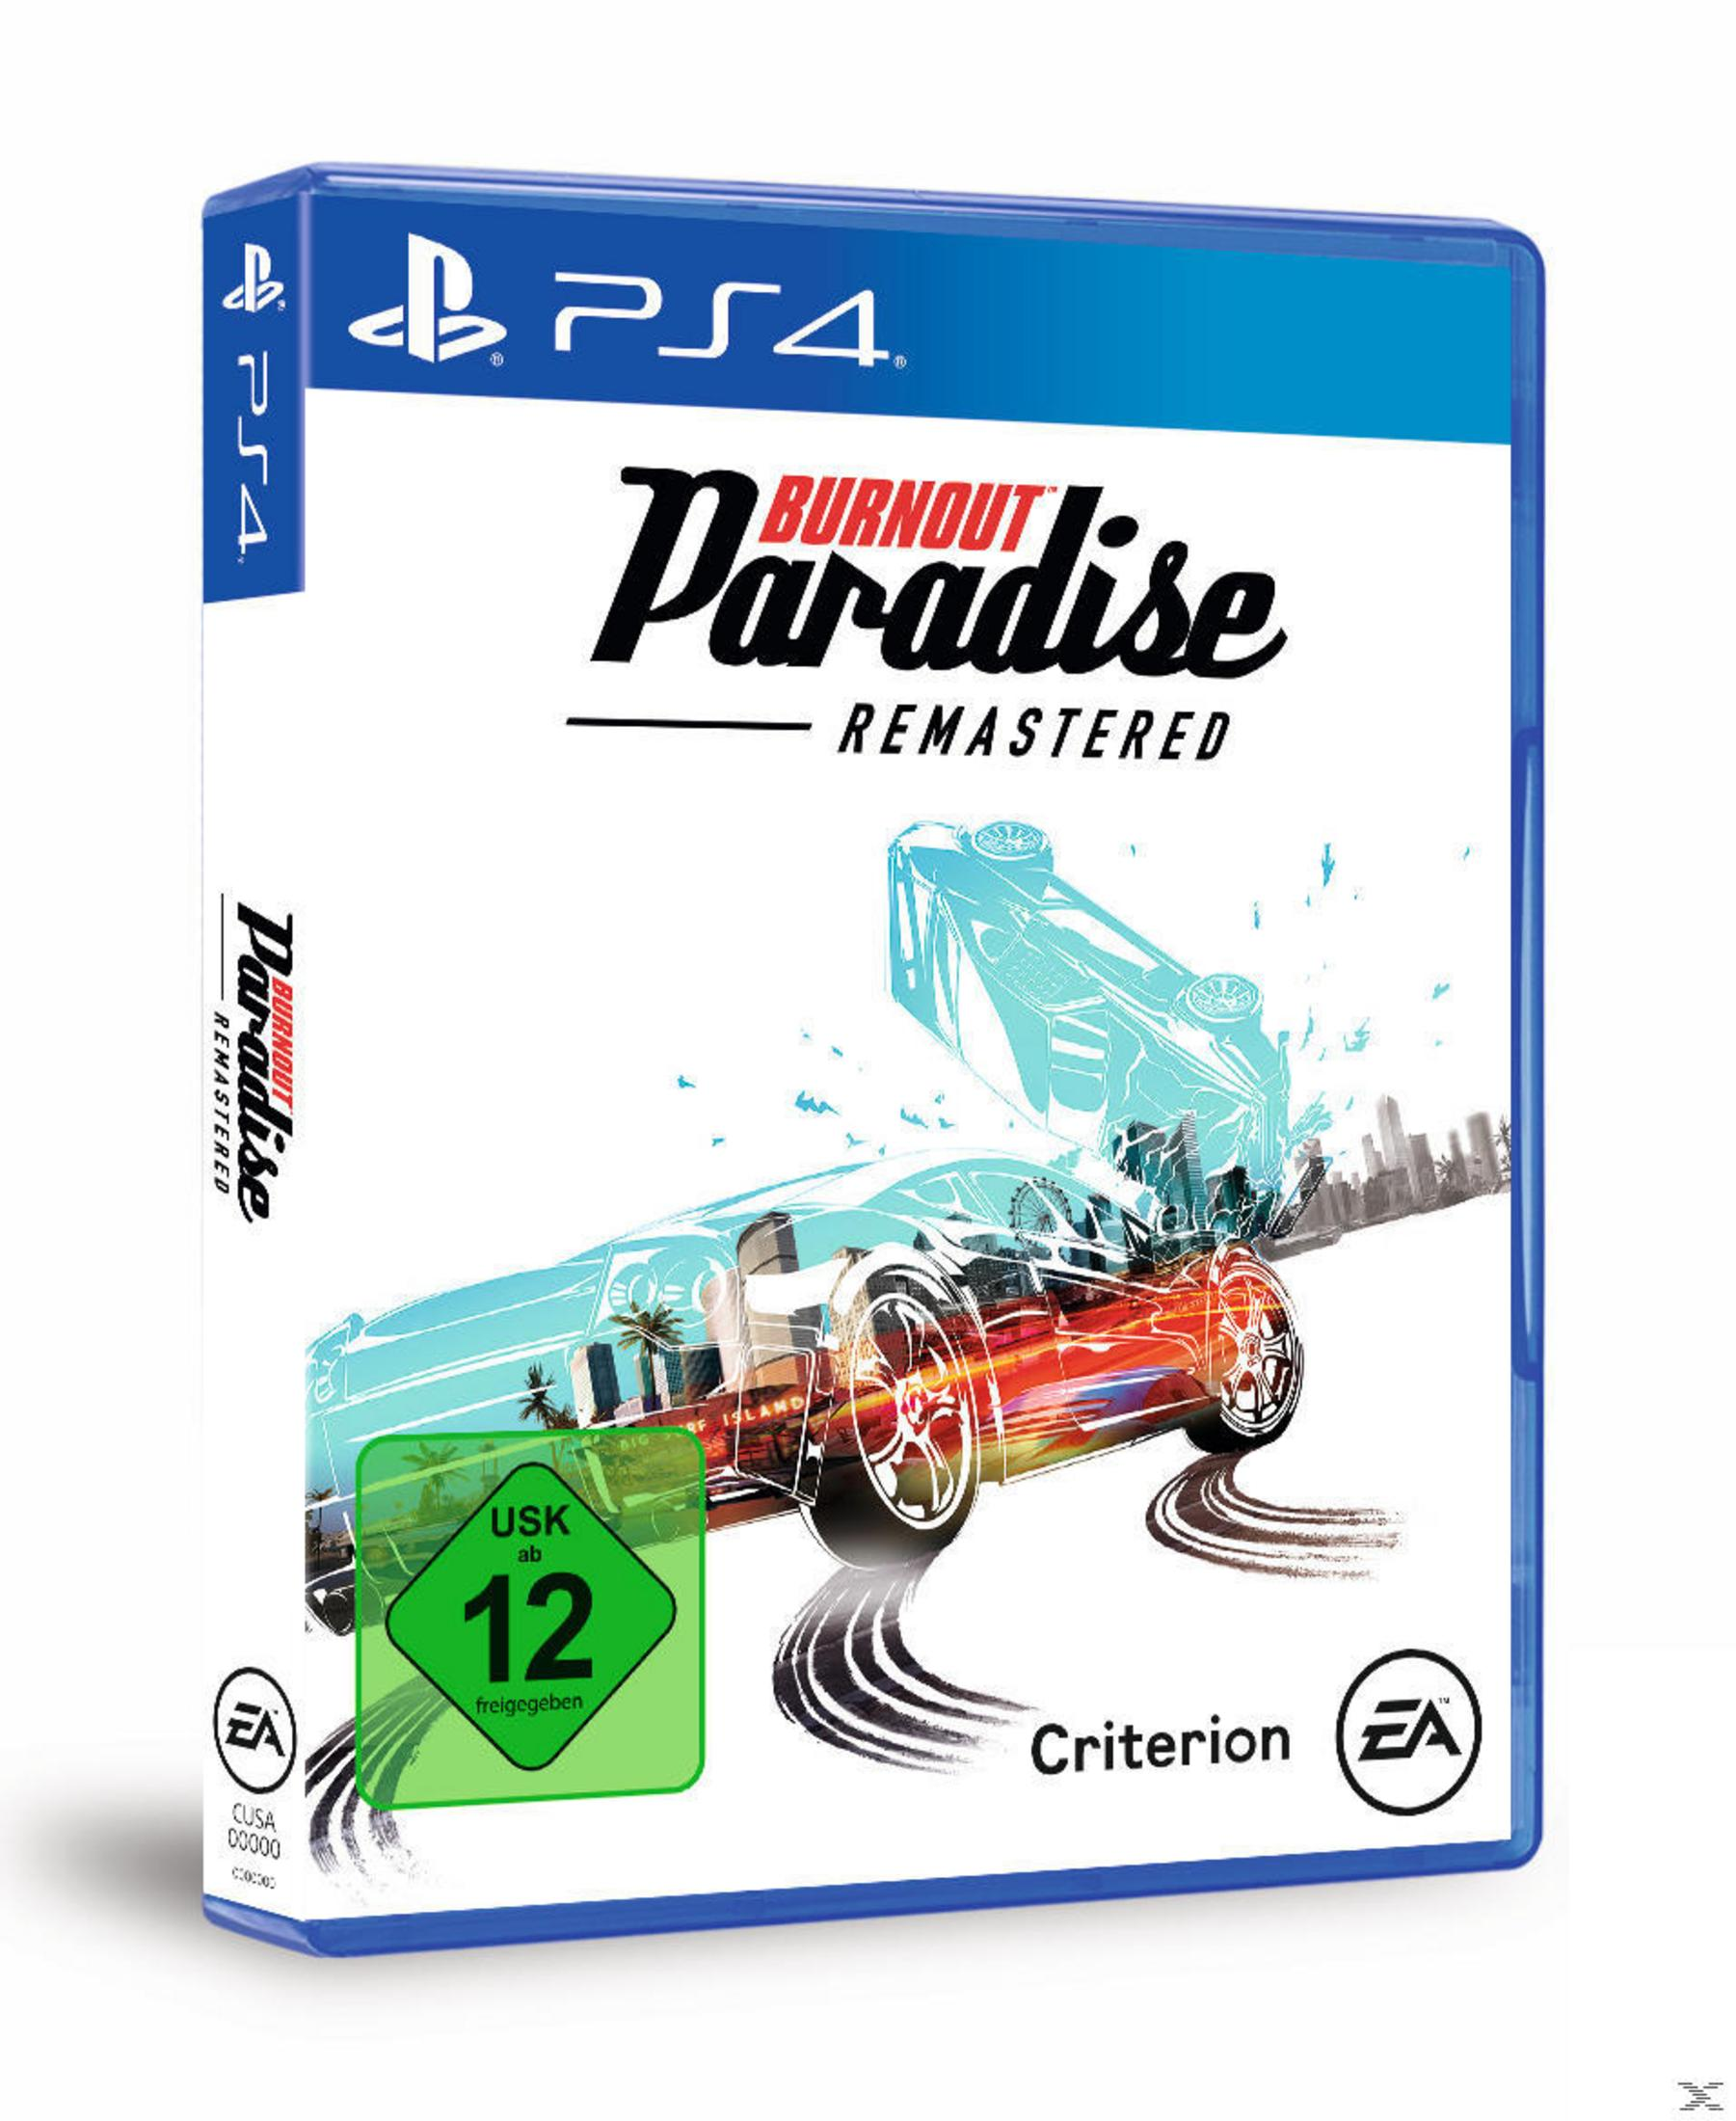 [PlayStation PS-4 Paradise Remastered 4] - Burnout